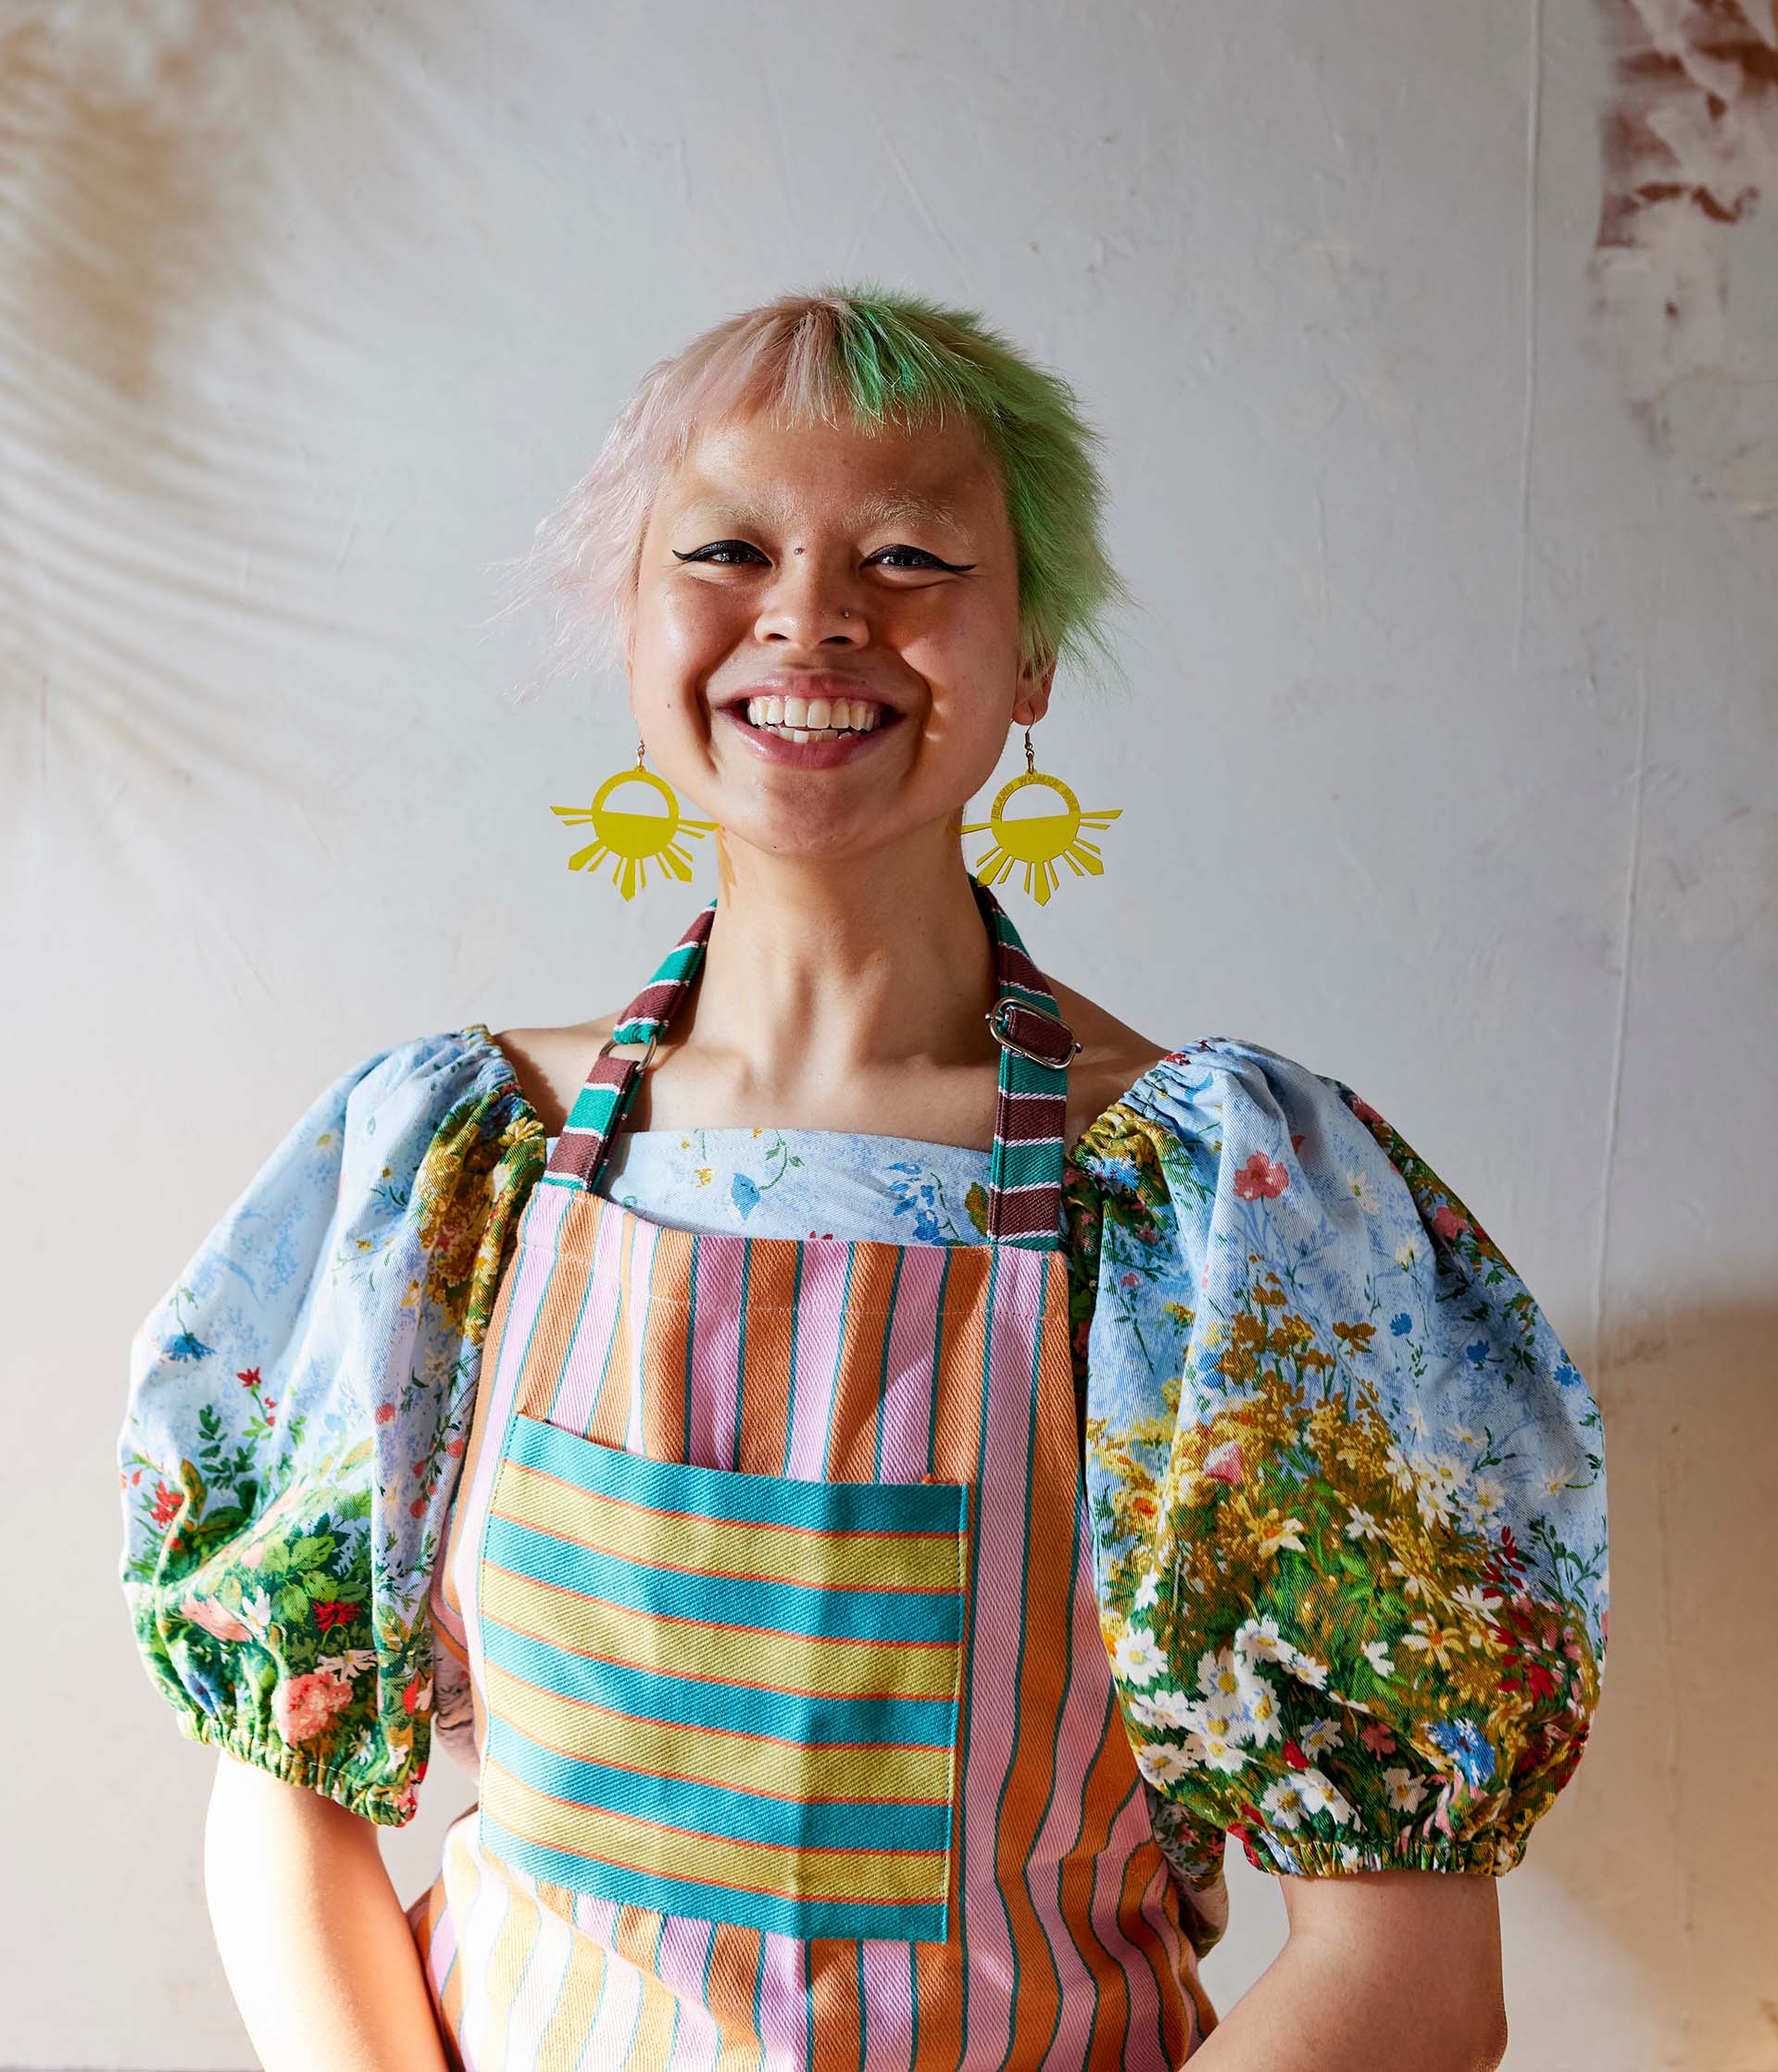 Portrait of cookbook author Abi Balingit, who wears a colorful apron that matches her pink and green hair.